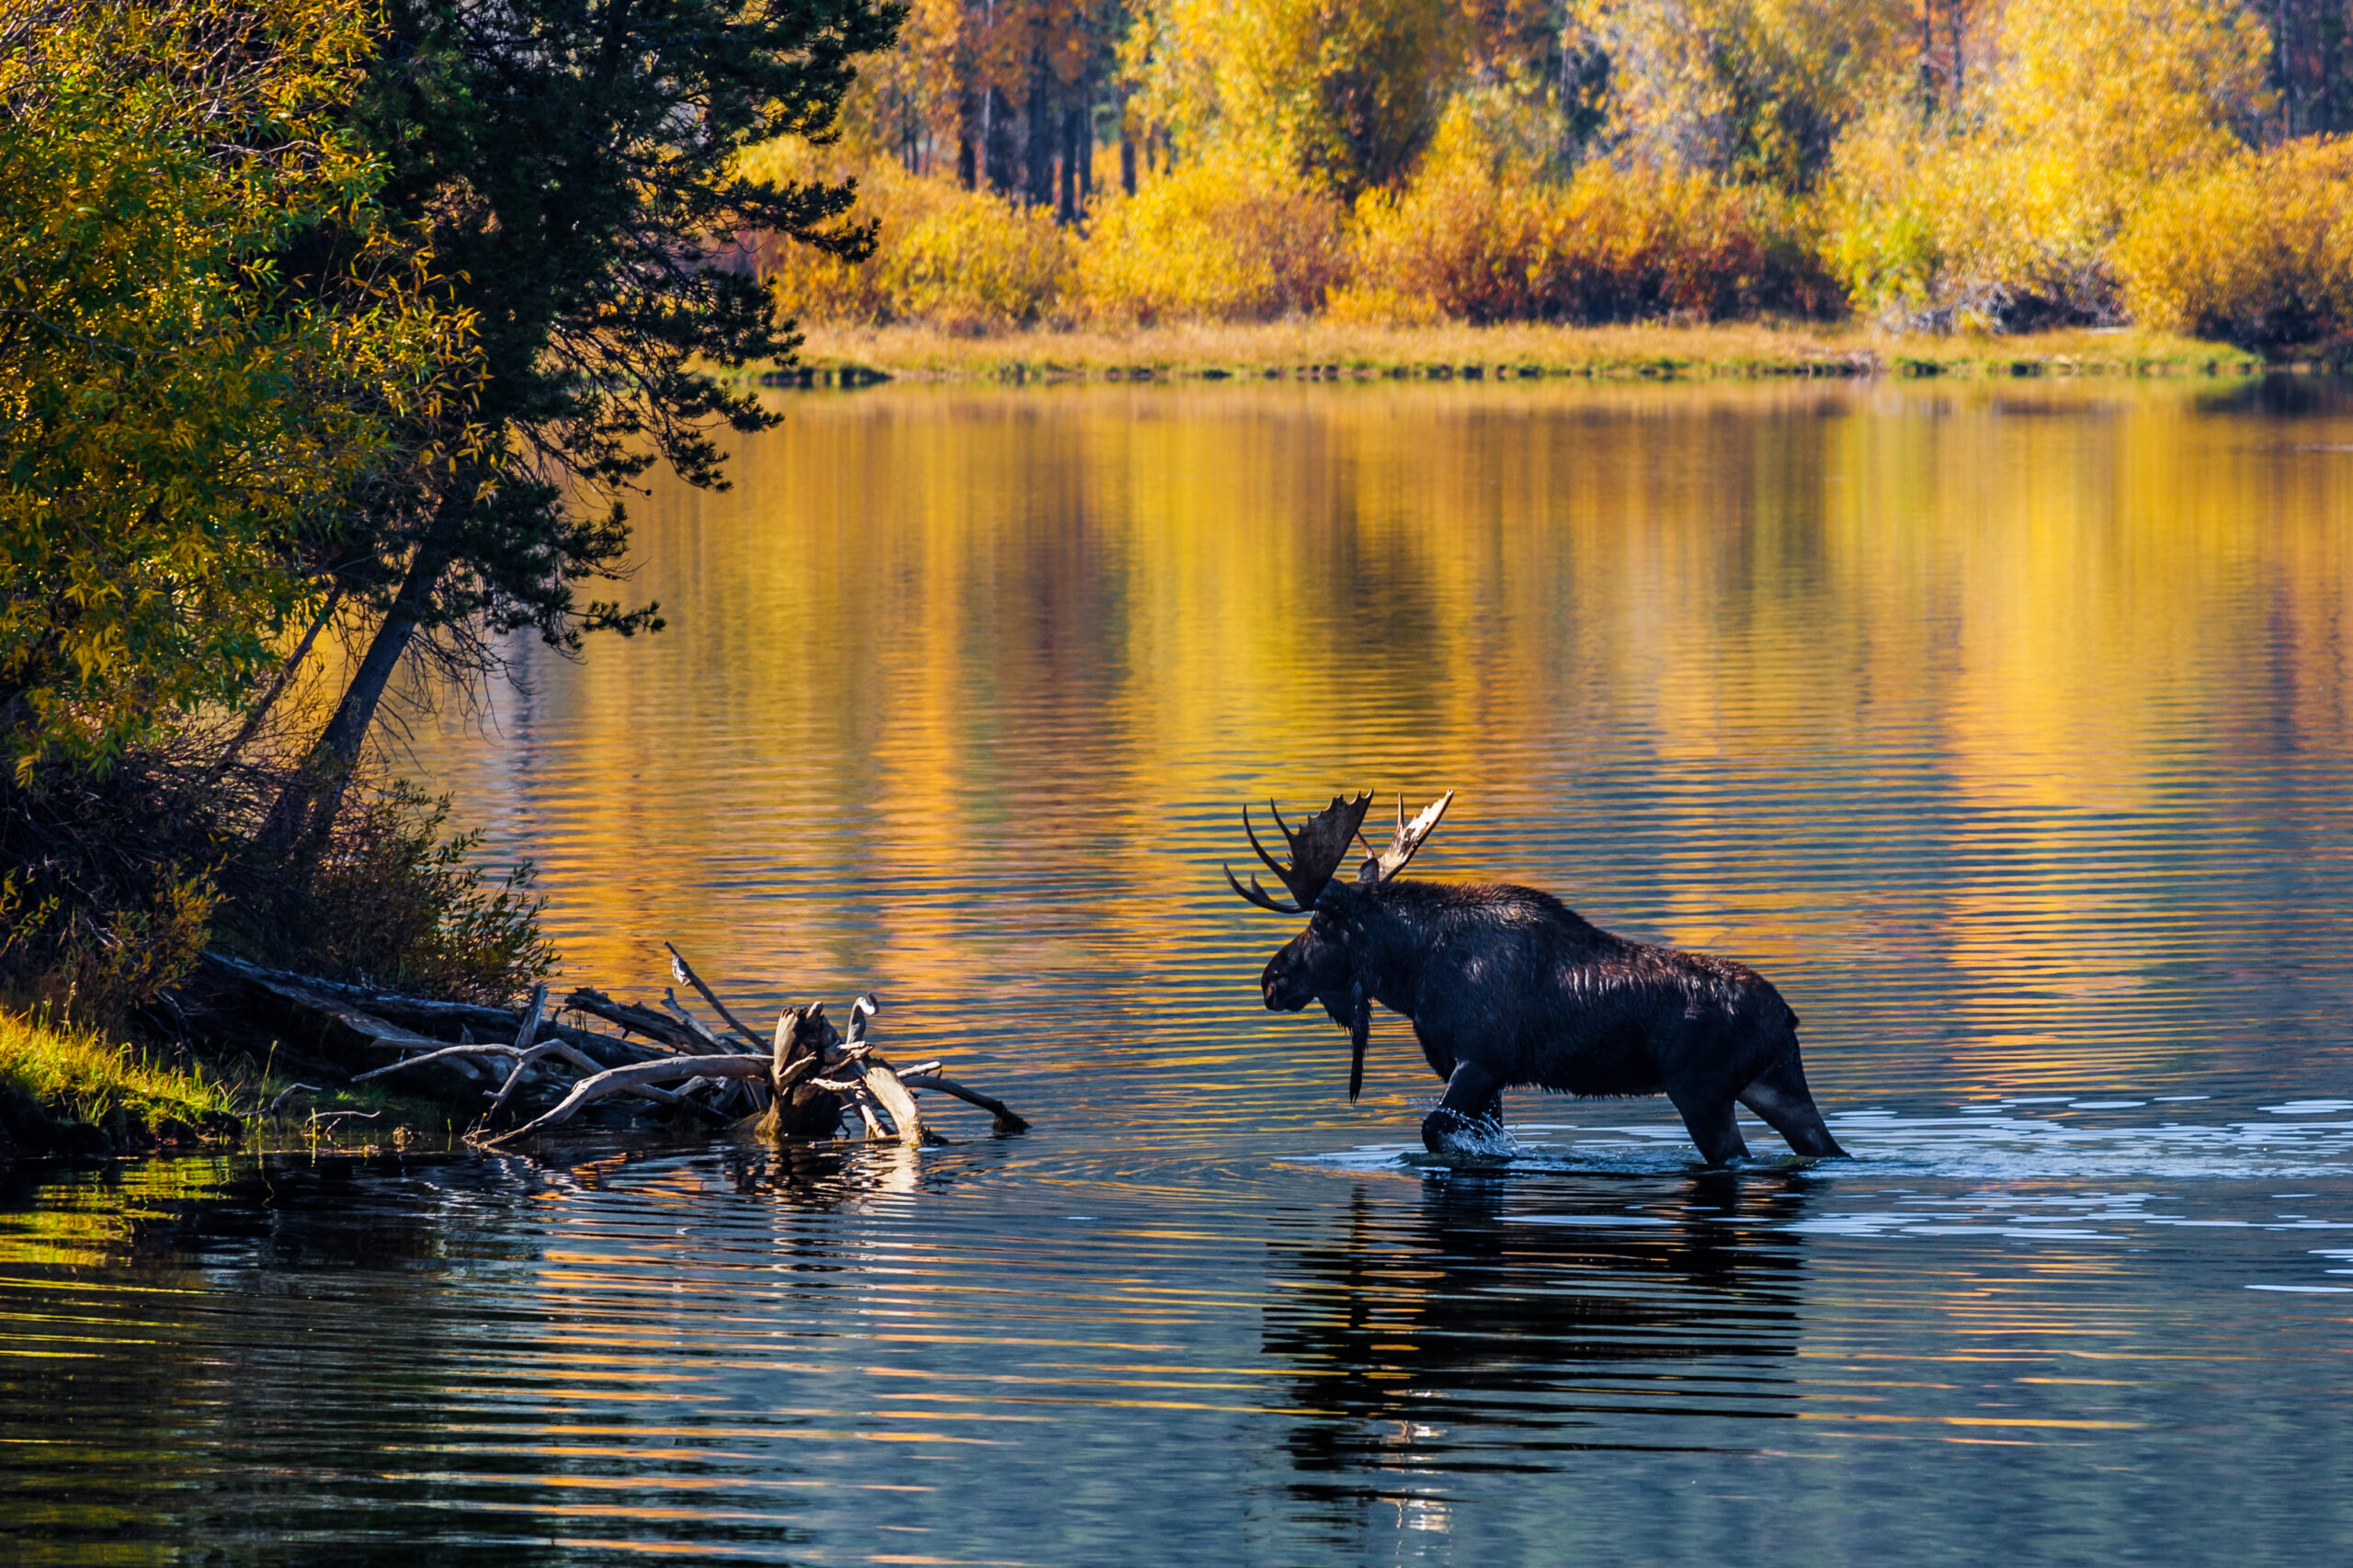 Moose walking through the river in the fall